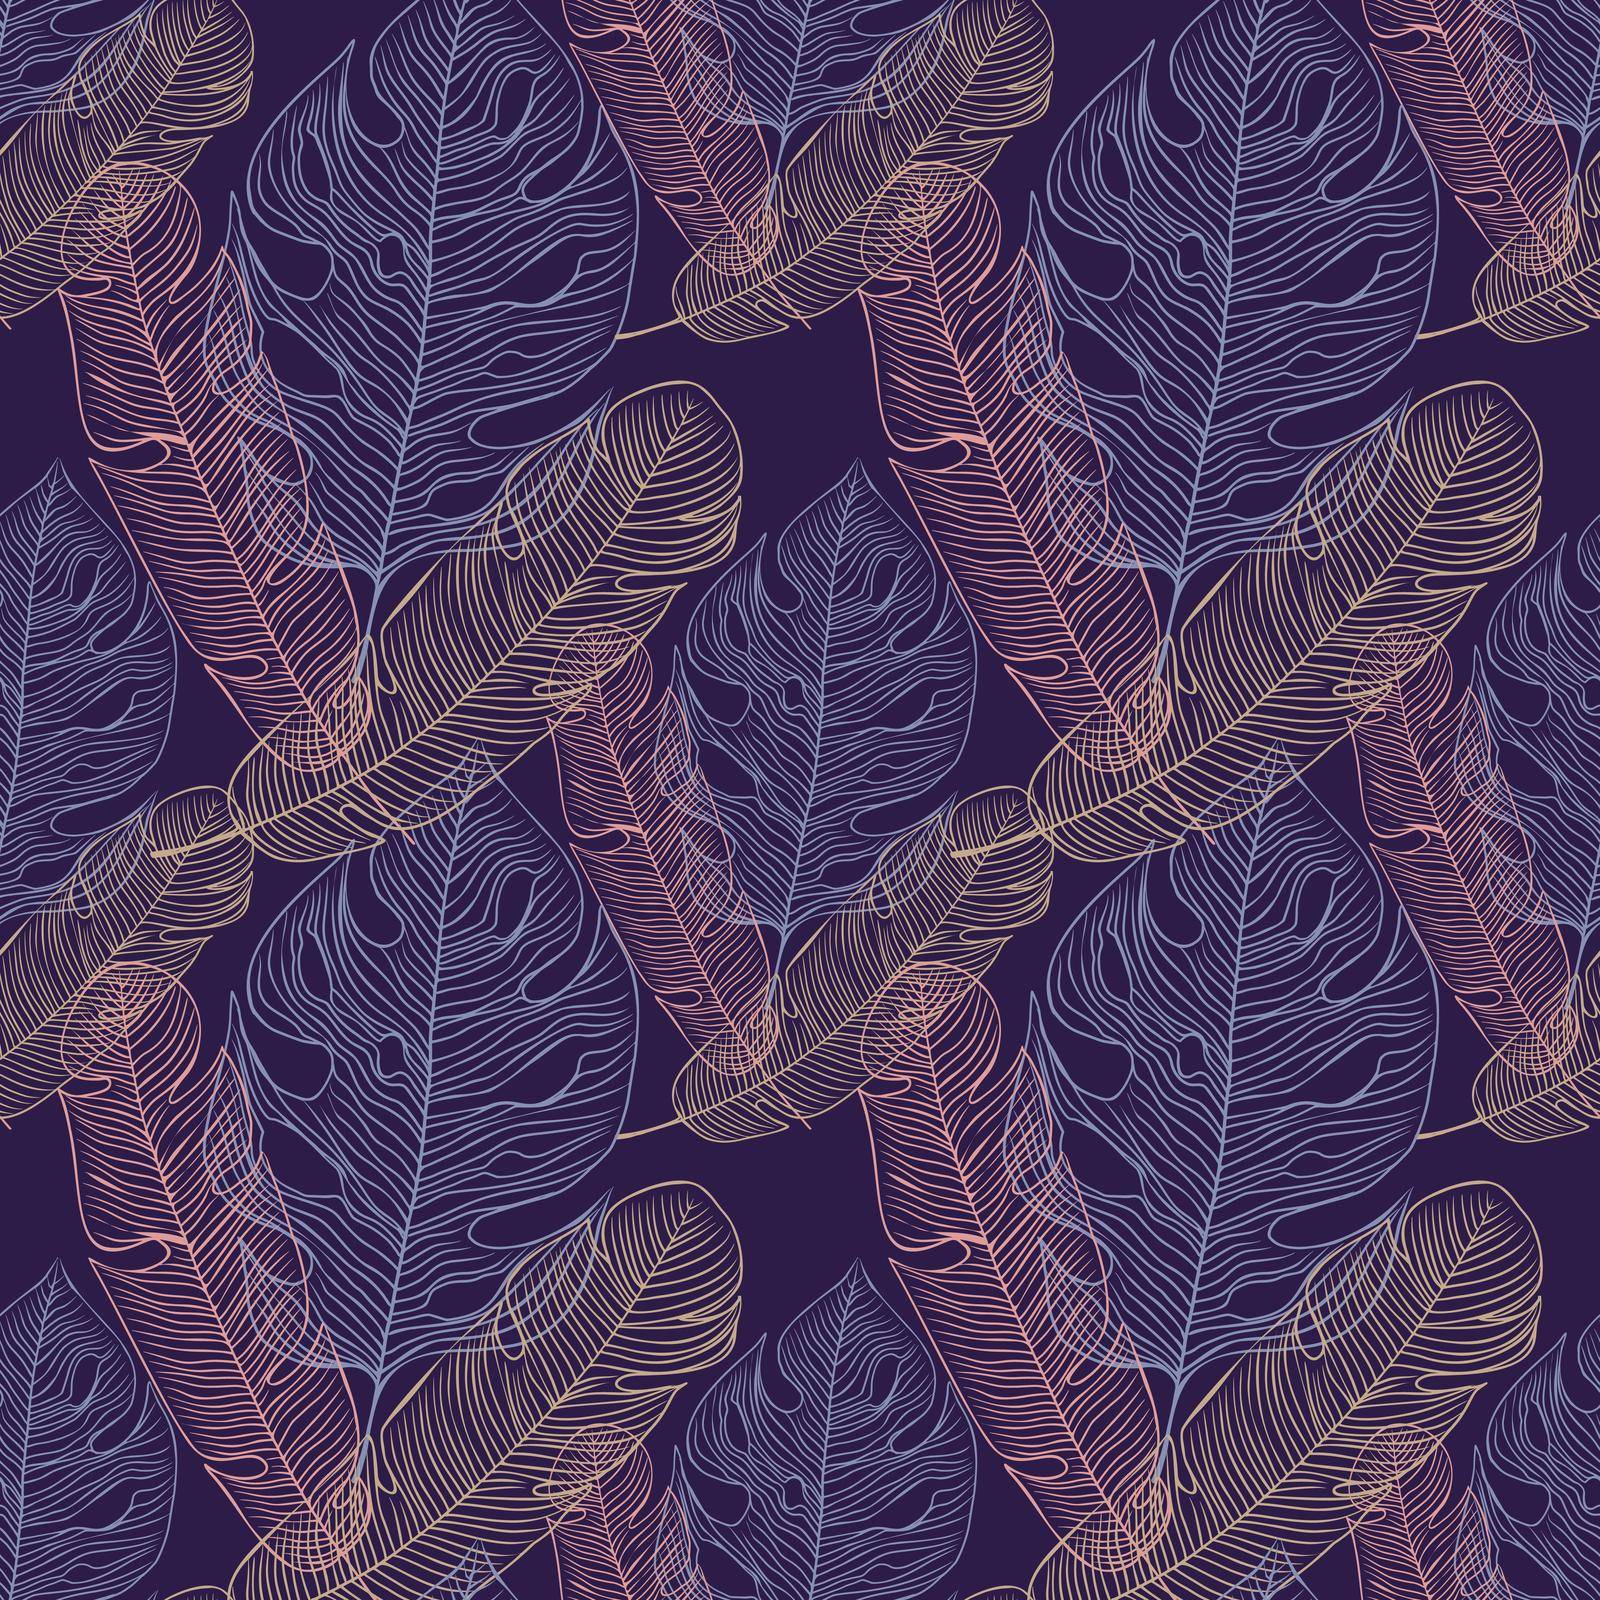 Tropical Leaves Dark Hand drawn Seamless Pattern for Textile and wallpapers. Vector illustration